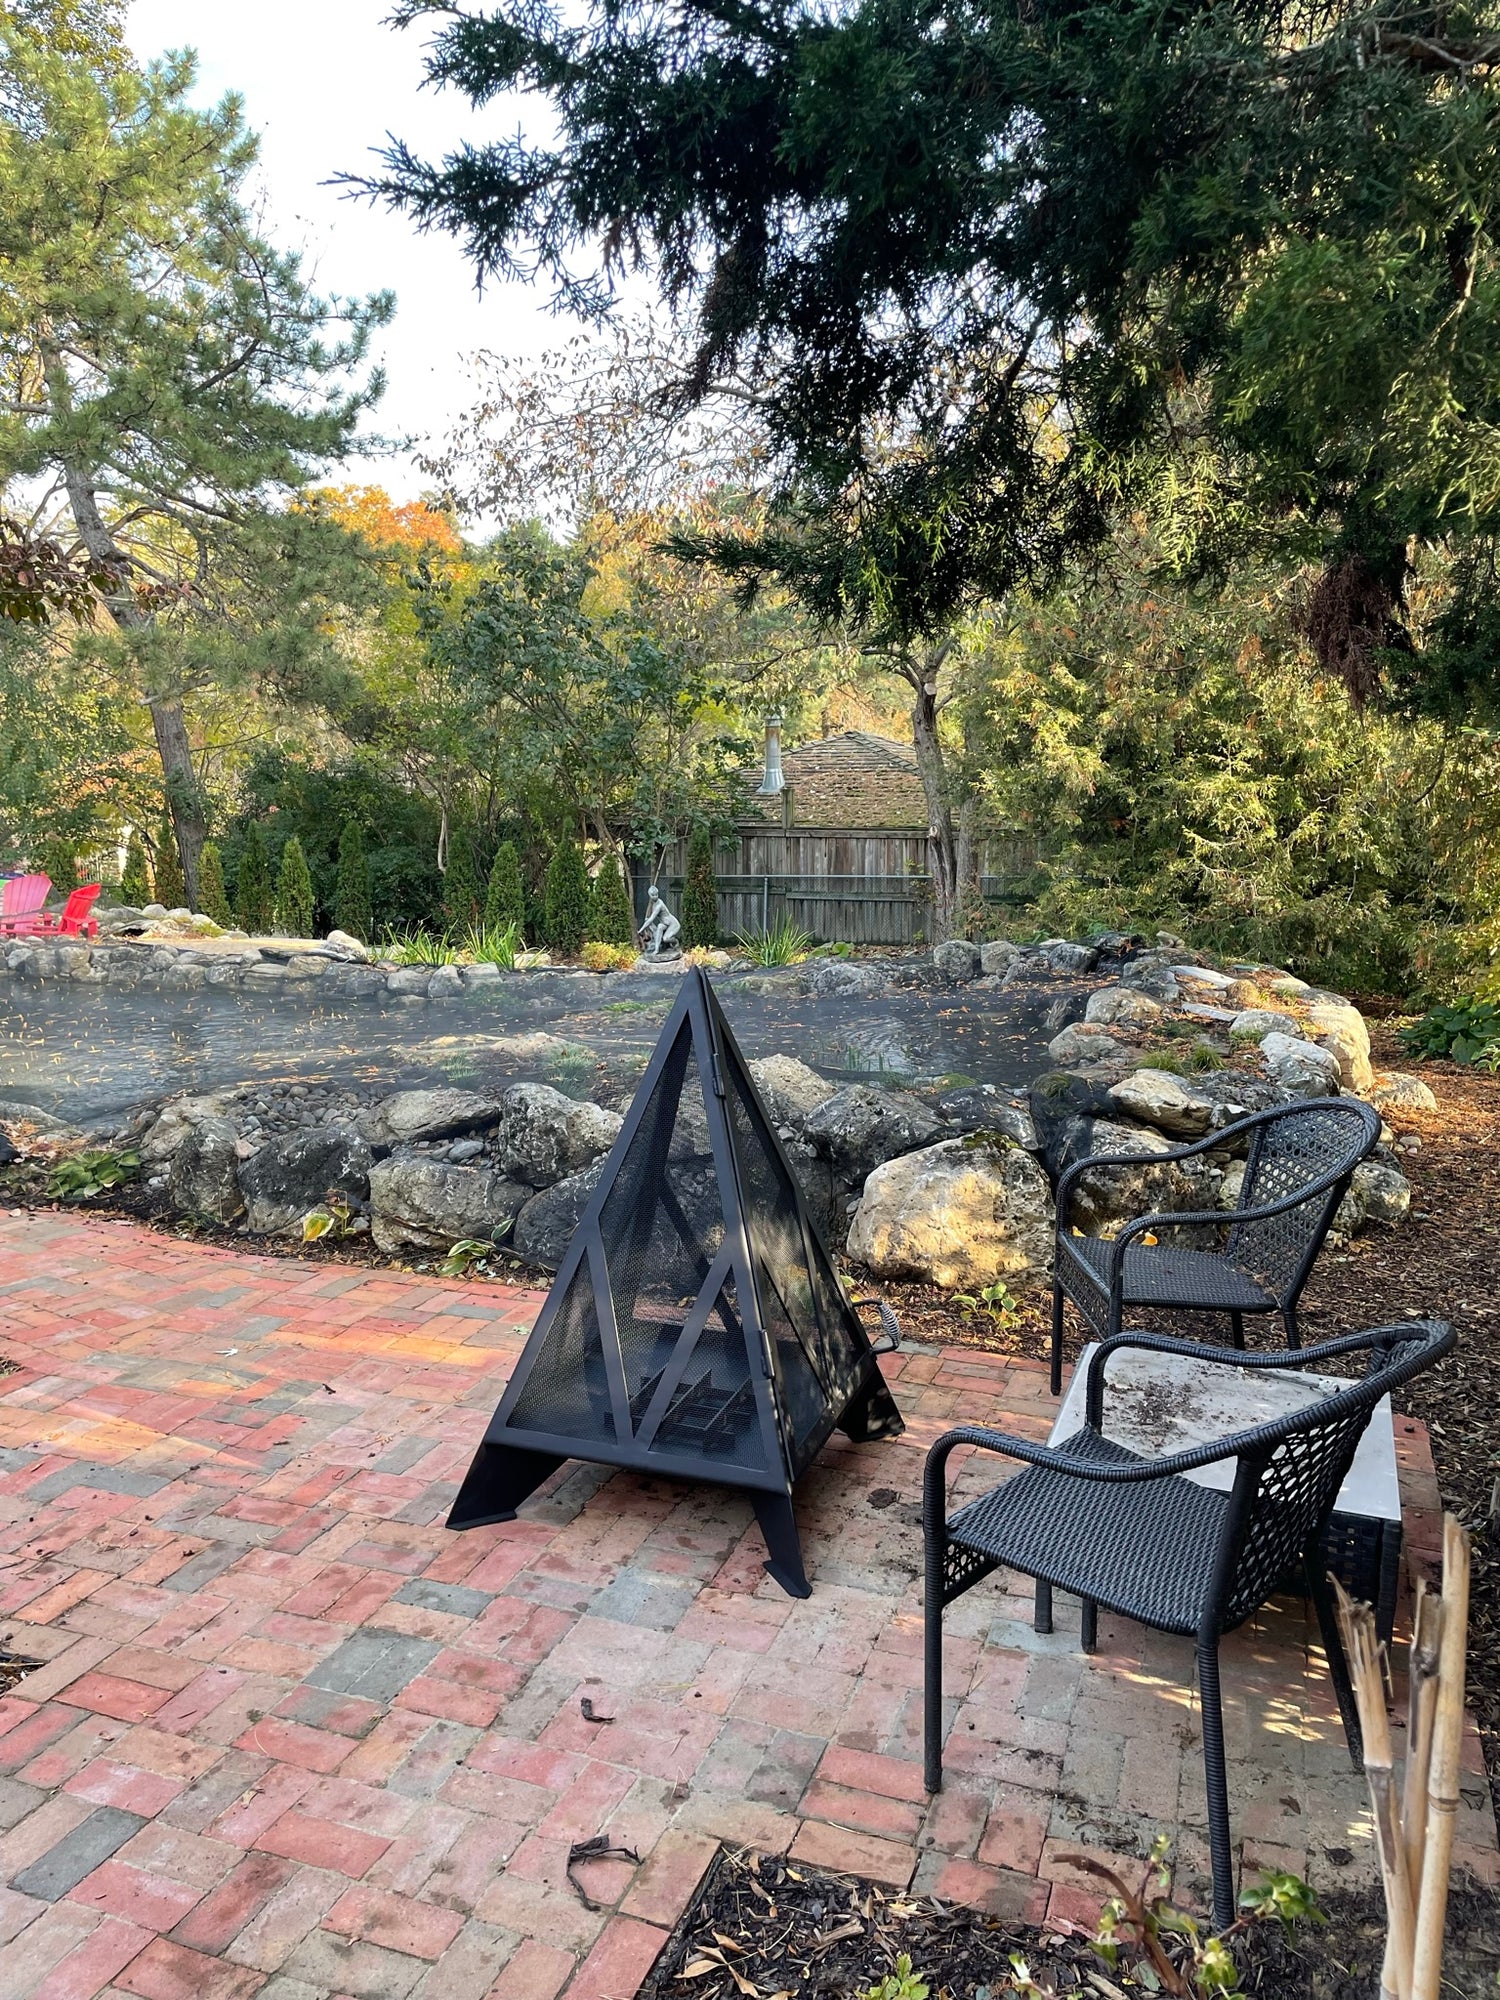 Pyramid Outdoor Fireplaces | Iron Embers